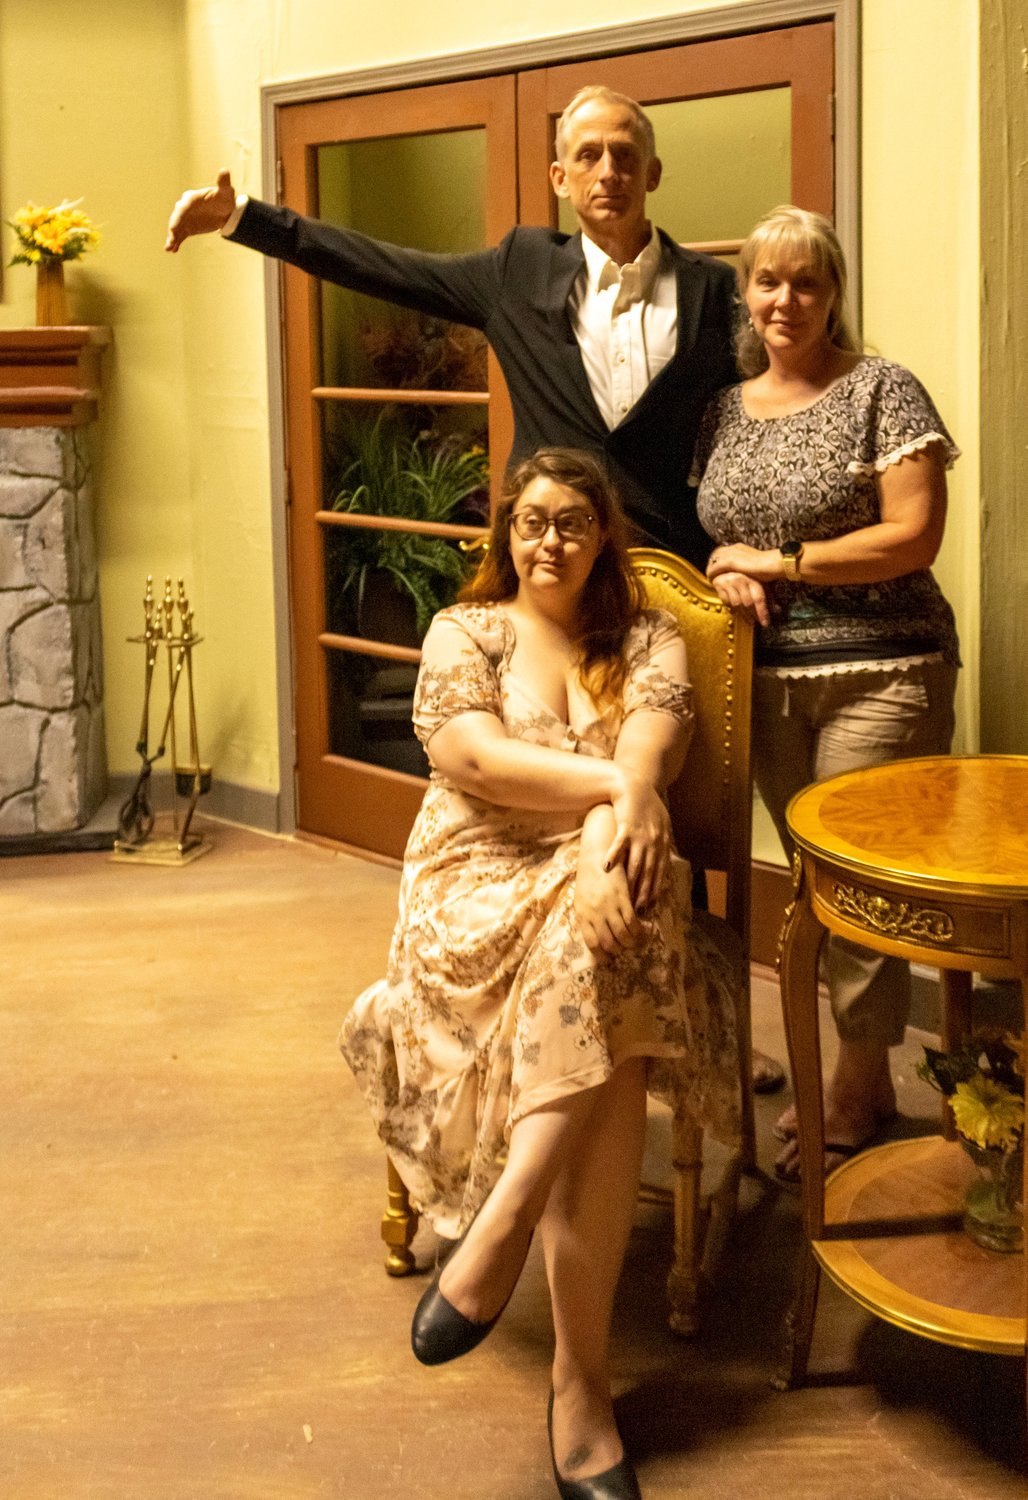 In rehearsal for Las Cruces Community Theatre’s upcoming production of “Harvey” are Brandon Brown (Elwood P. Dowd), Lennie Brown (Veta Louise Simmons) and seated, Alex Wheeler Larkin (Myrtle Mae Simmons). At far right is Harvey.